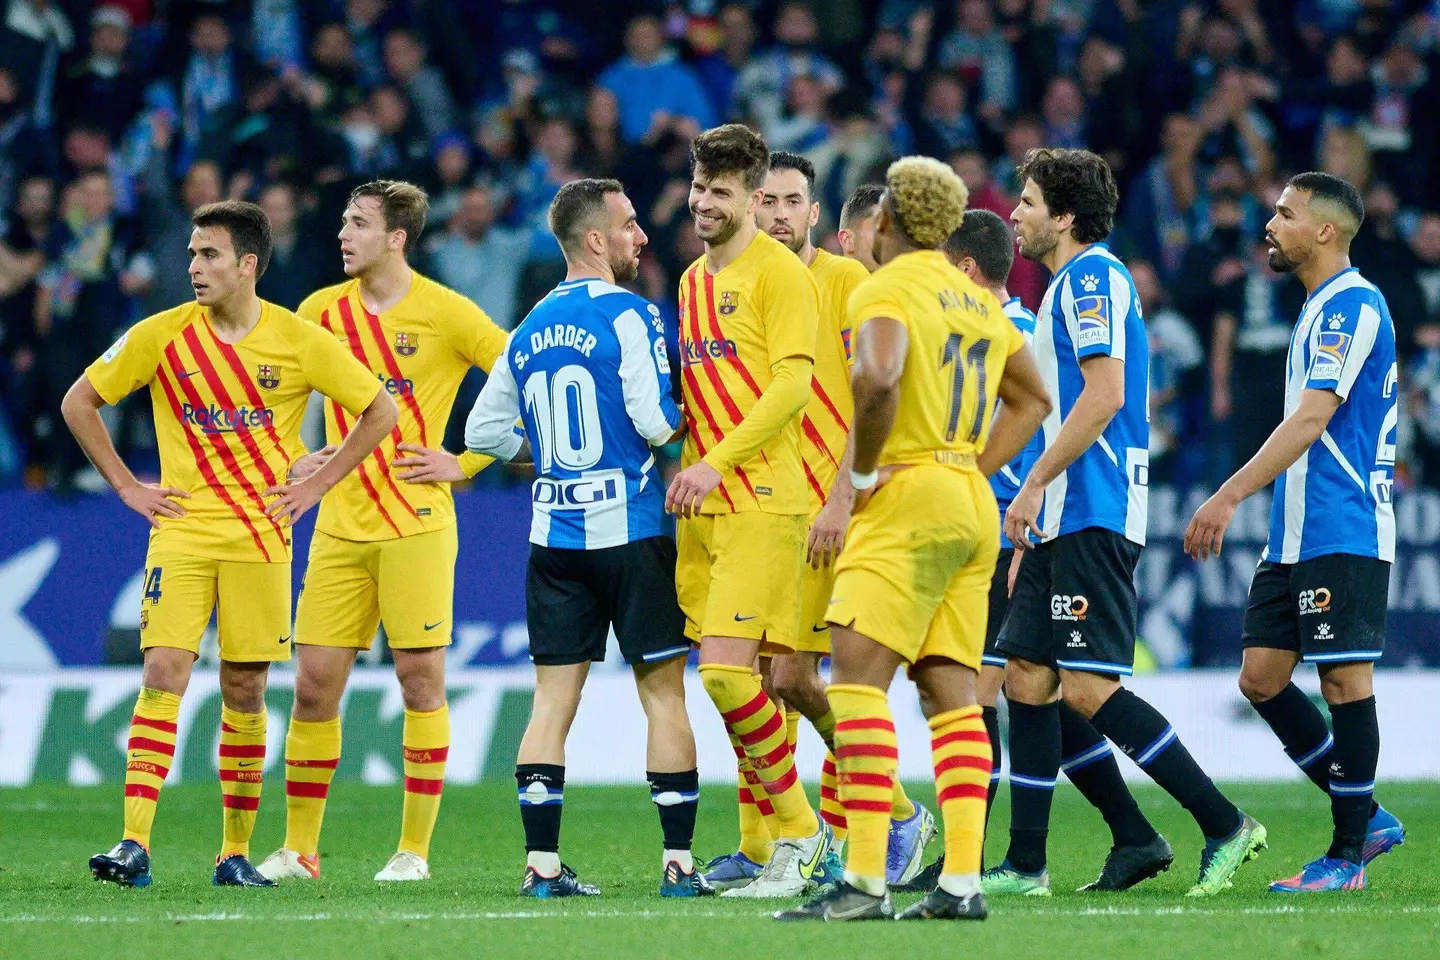 Pique has been targeted in the past by Espanyol supporters (Image: PA)